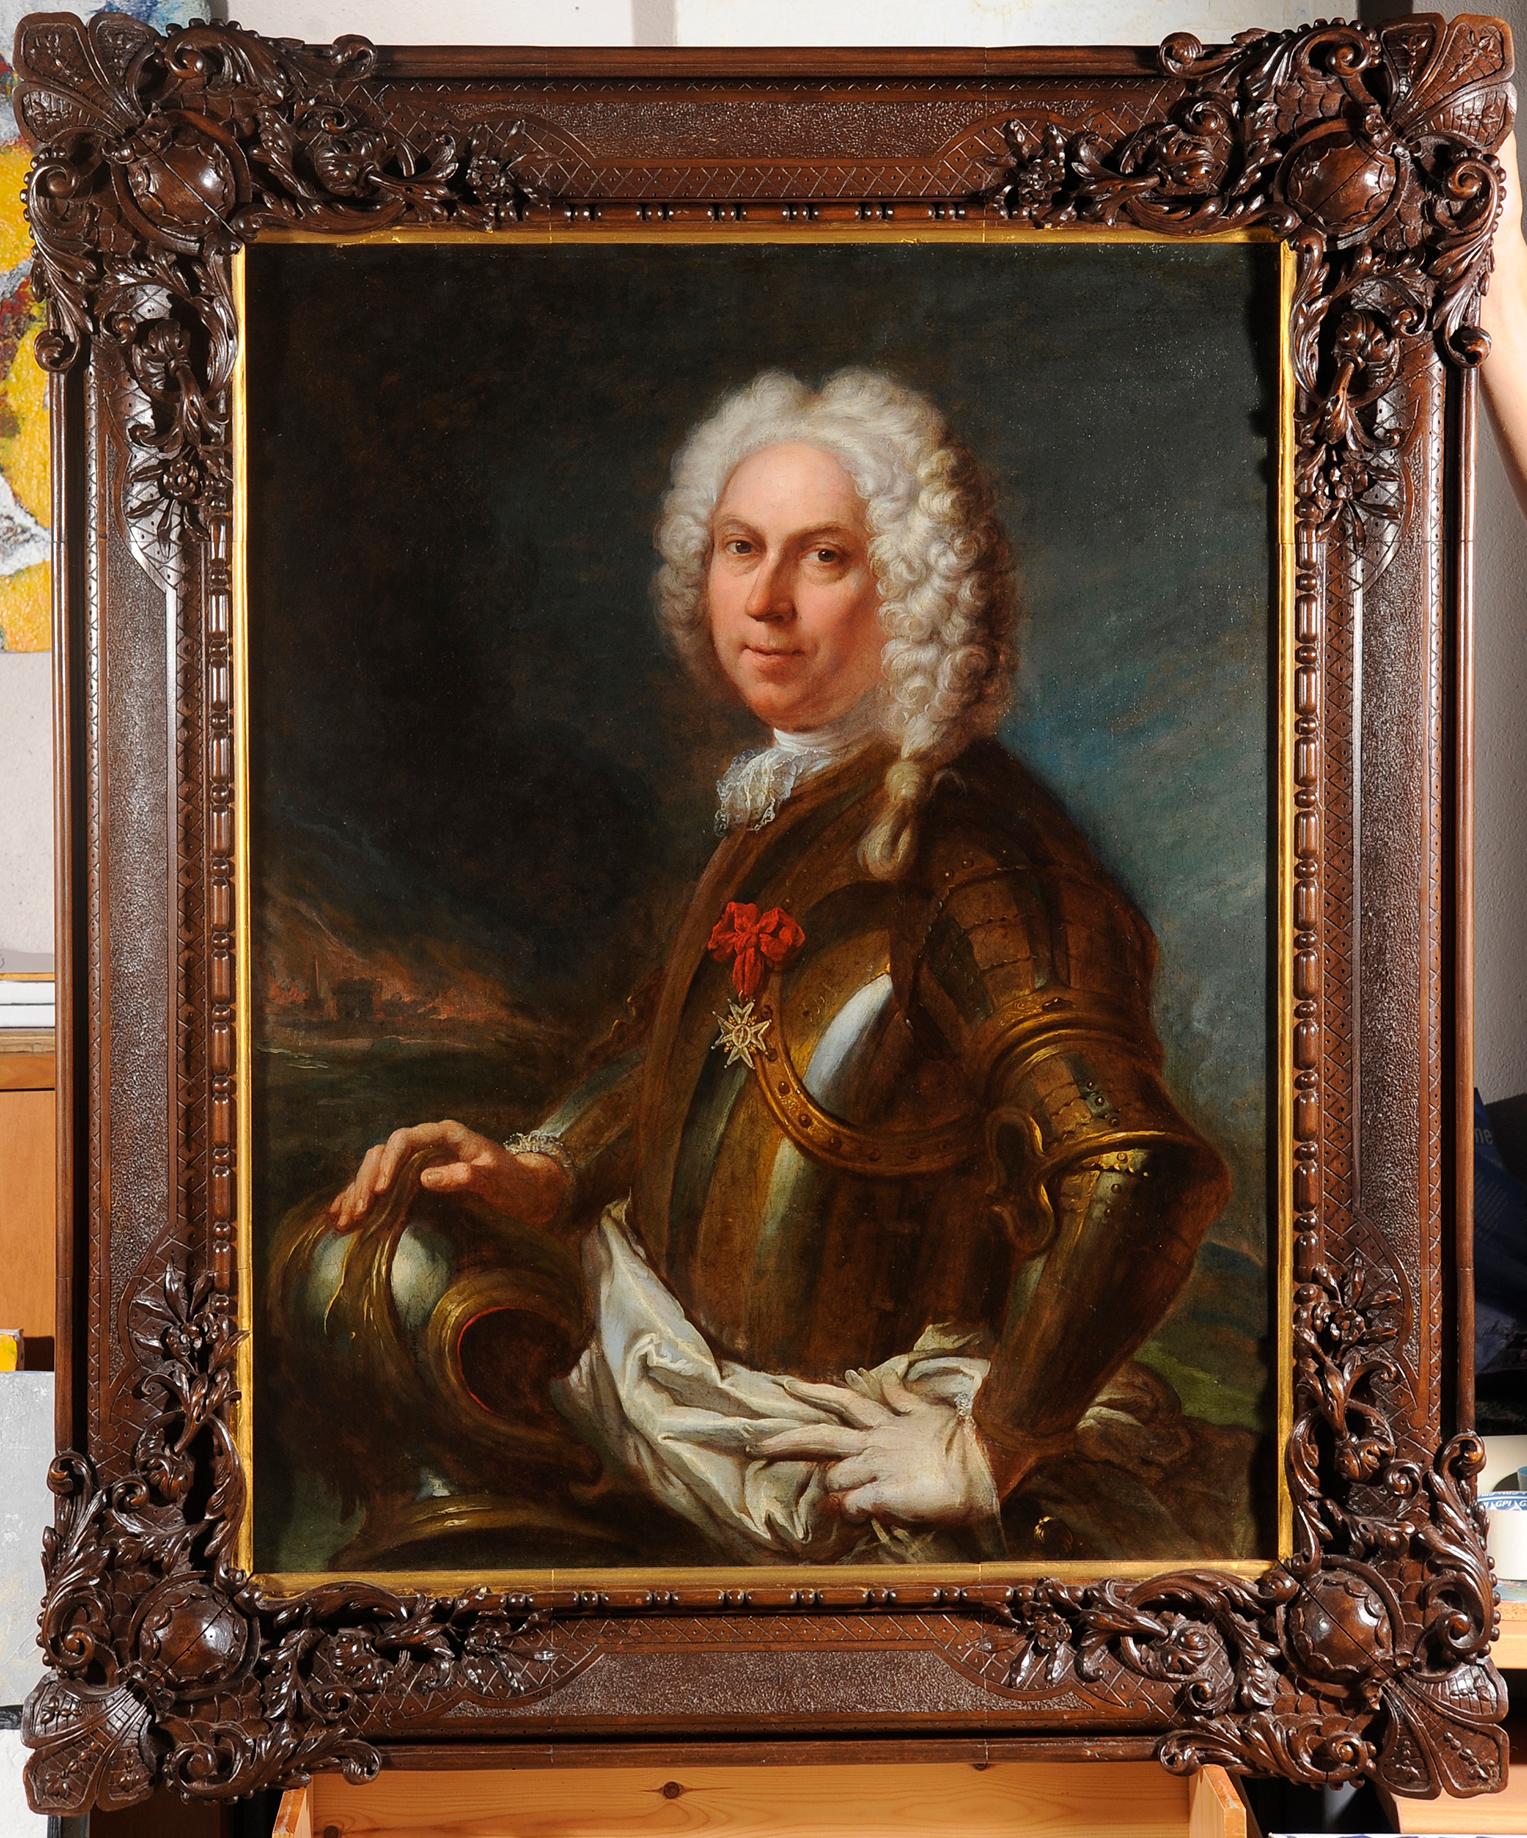 Portrait of a man in armor - Painting by Jacques Dumont called Dumont Le Romain